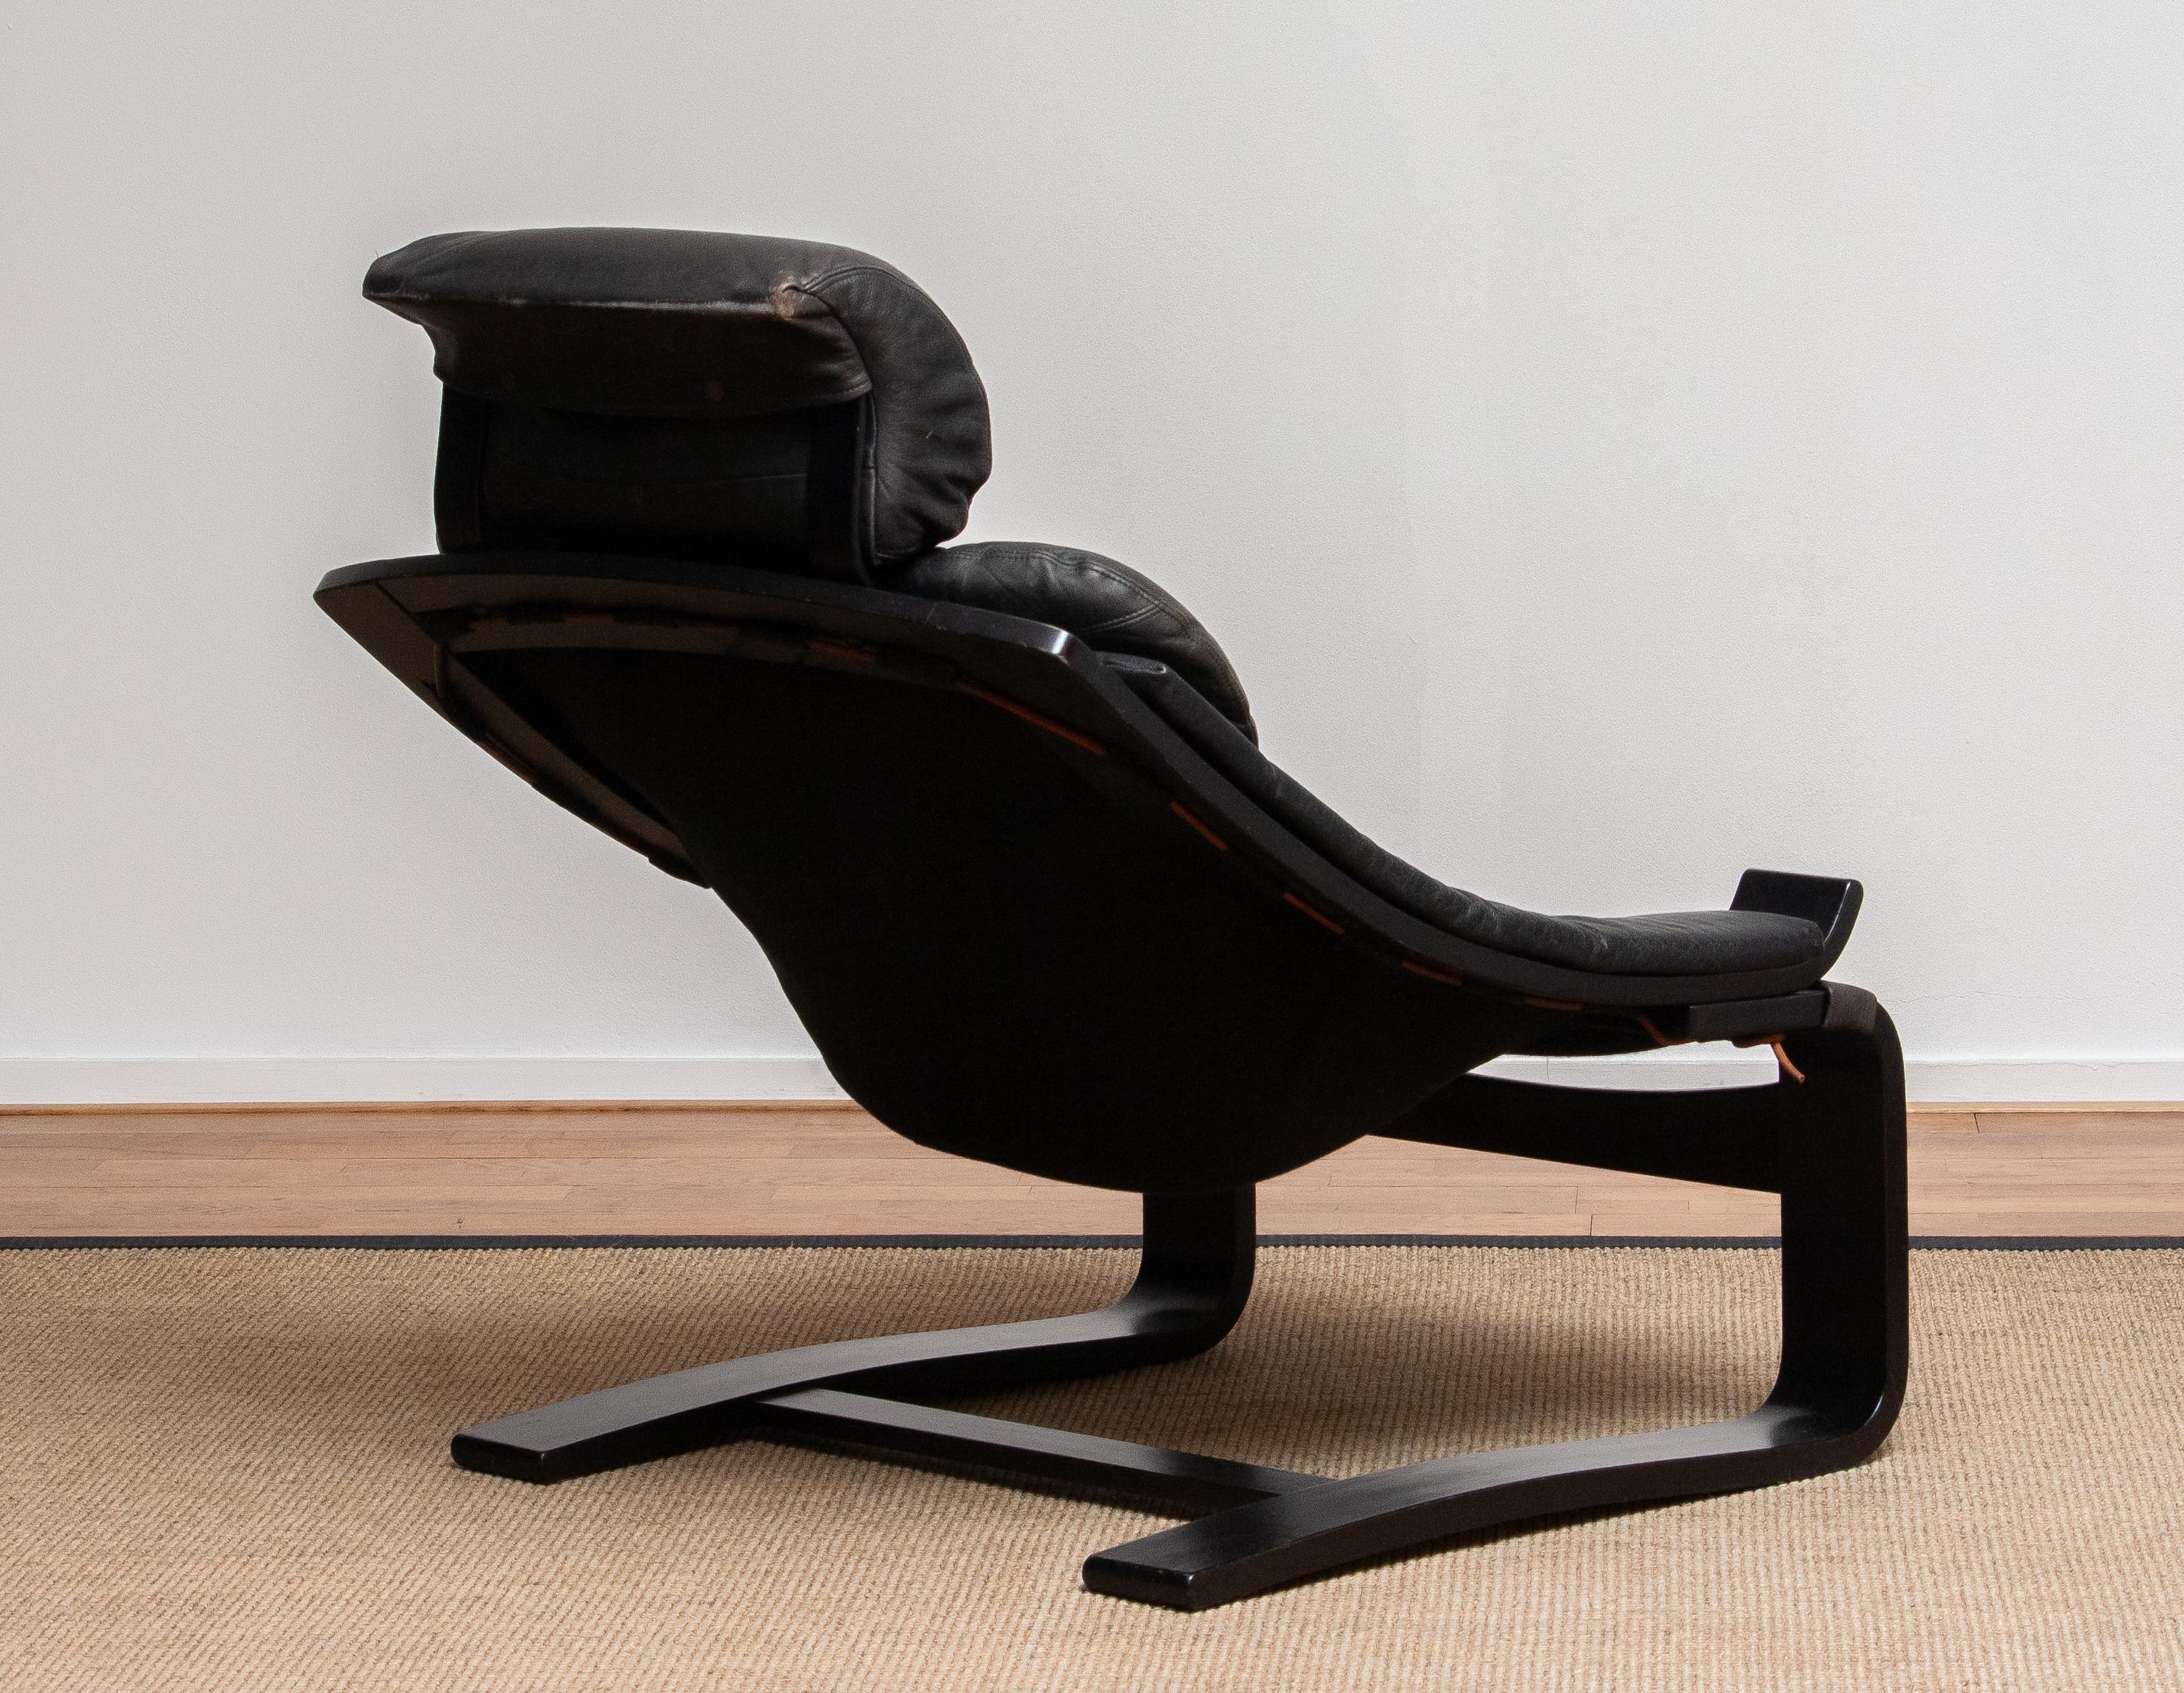 Late 20th Century 1970s, Black Kroken Lounge Chair by Ake Fribytter for Nelo Sweden in Leather